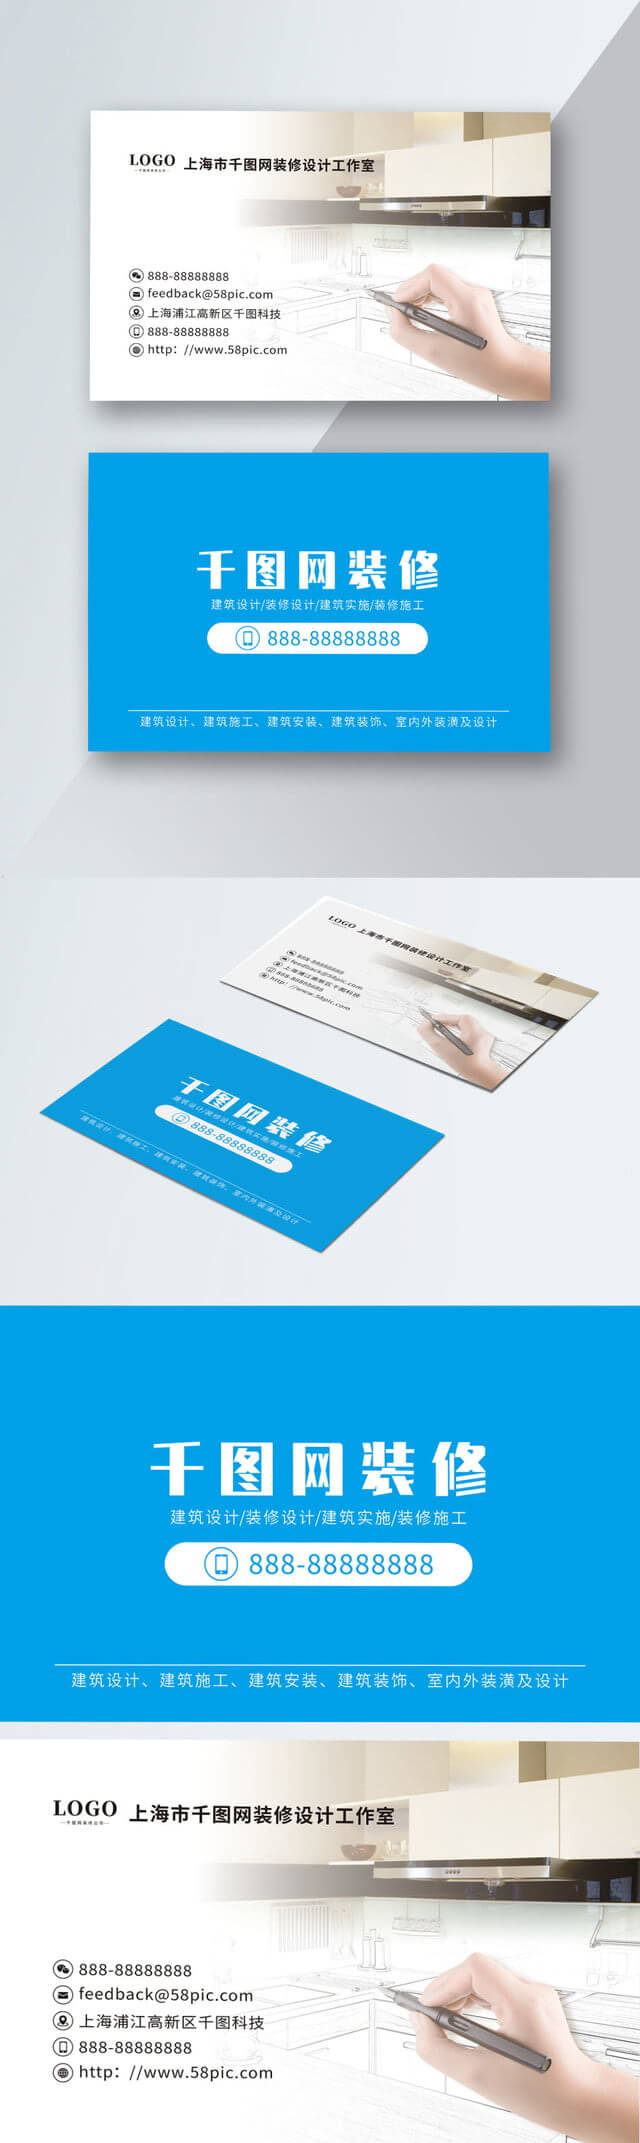 Simple Simple Business Card Architecture Construction Throughout Construction Business Card Templates Download Free